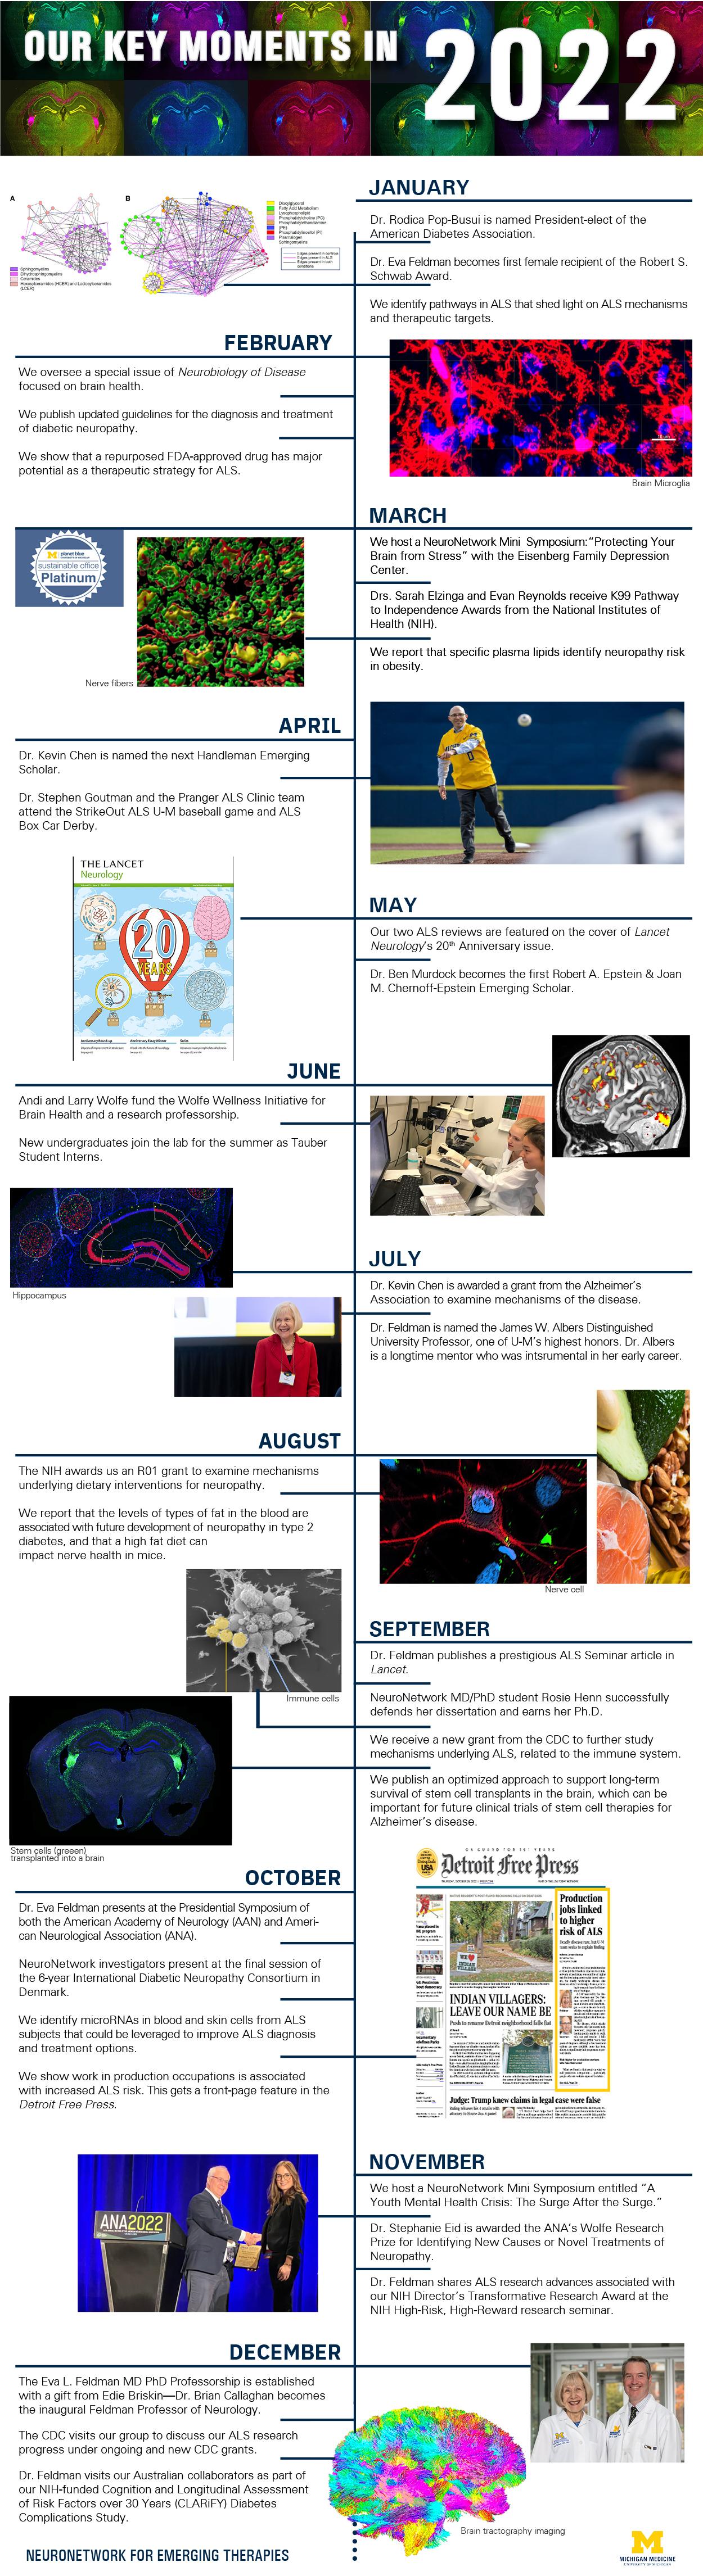 Timeline of the NeuroNetwork for Emerging Therapies key moments in 2022